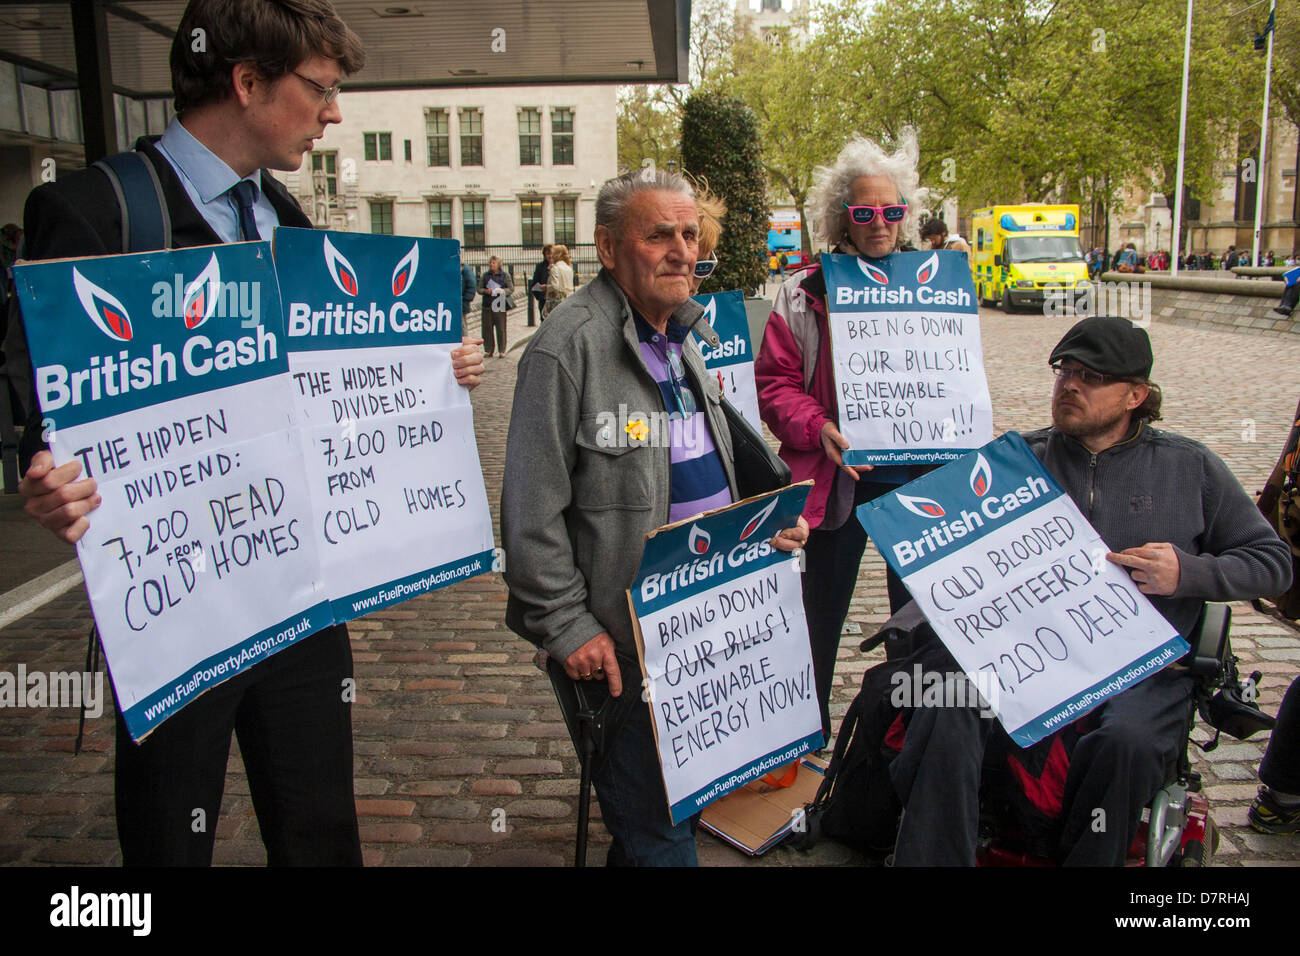 London, UK. 13th May 2013. Protesters demonstrate against alleged profiteering by energy group Centrica, outside their AGM. Credit: Paul Davey/Alamy Live News Stock Photo